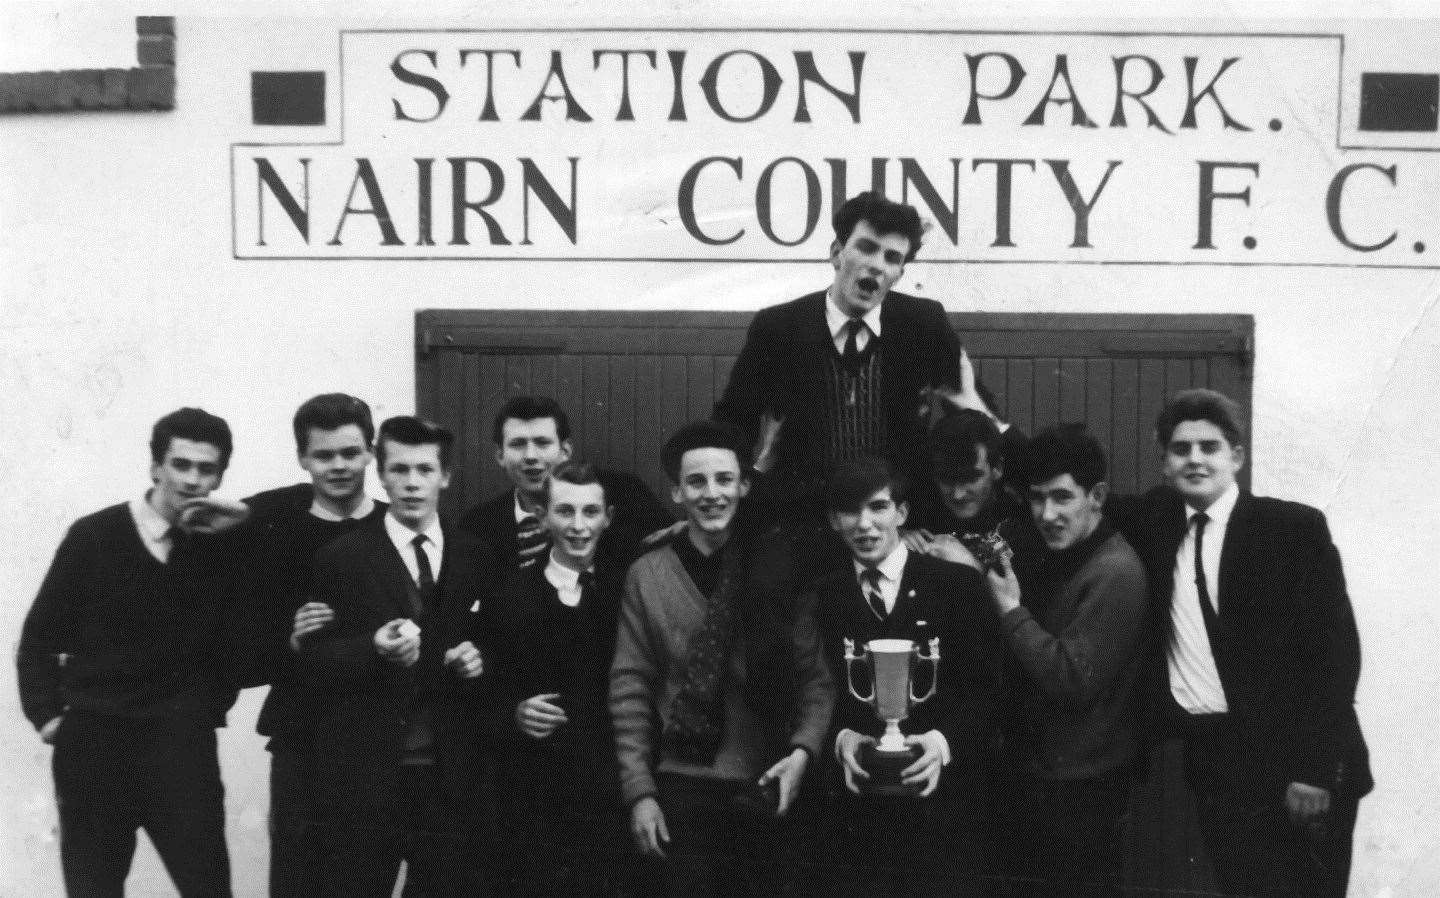 Golspie High School players celebrate outside Station Park, Nairn after winning the North of Scotland Cup. L to R: Bobby MacLeod, Arthur Fraser, Cecil Melville, Allan Lannon, Ian Taggart, John MacKay, Christopher Yuill, Alan Syme, John Robertson, Adam MacPherson with David Cowie being help shoulder high.